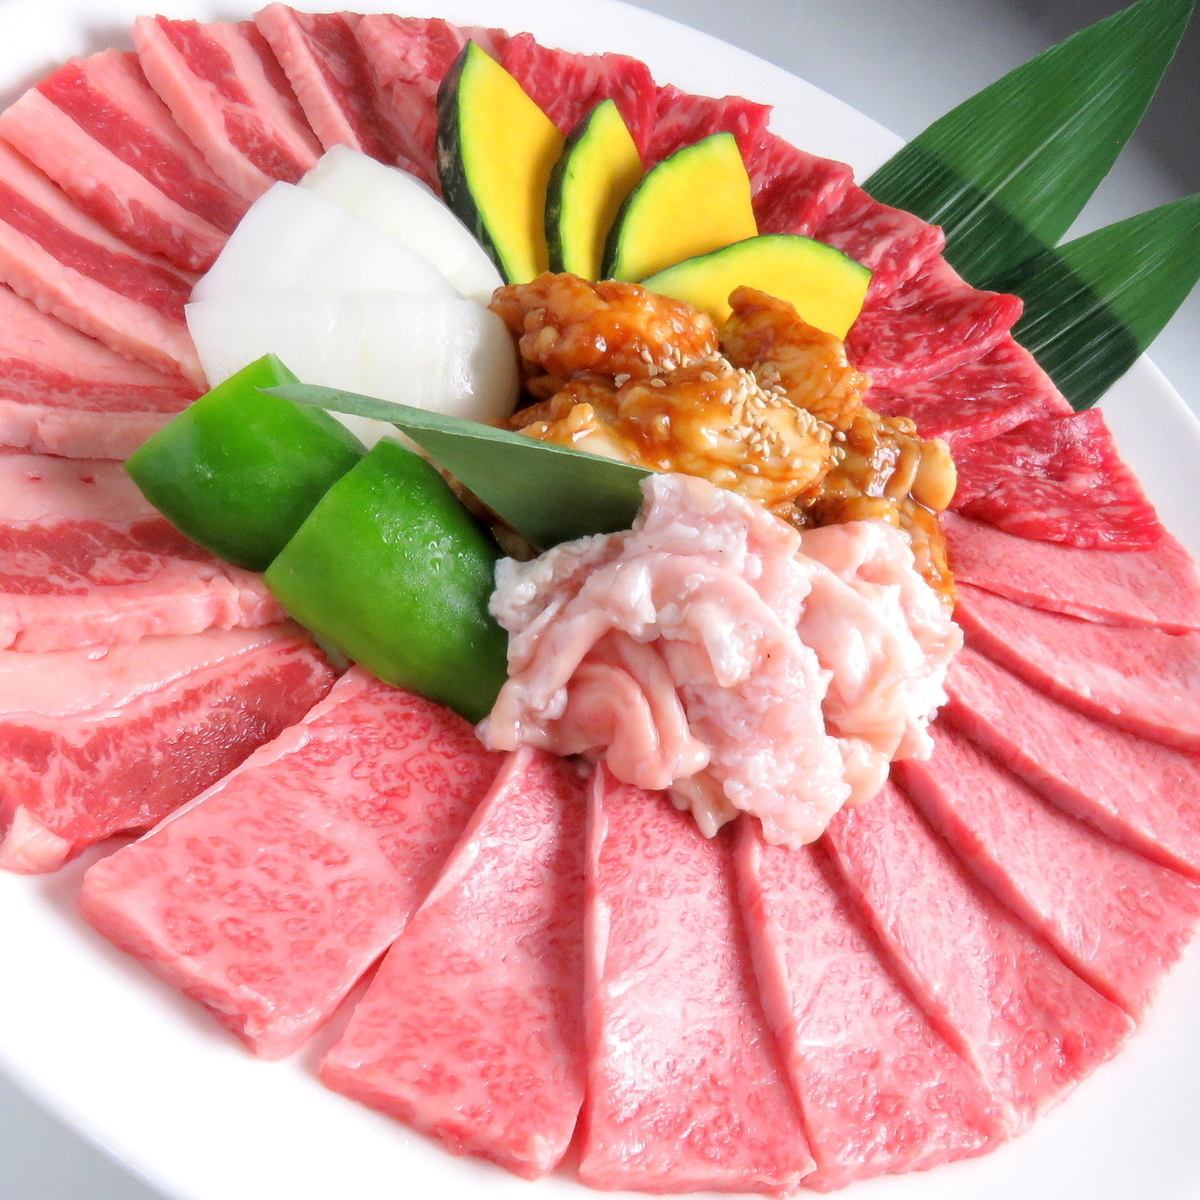 You can enjoy high-quality meat and sake at lunch♪